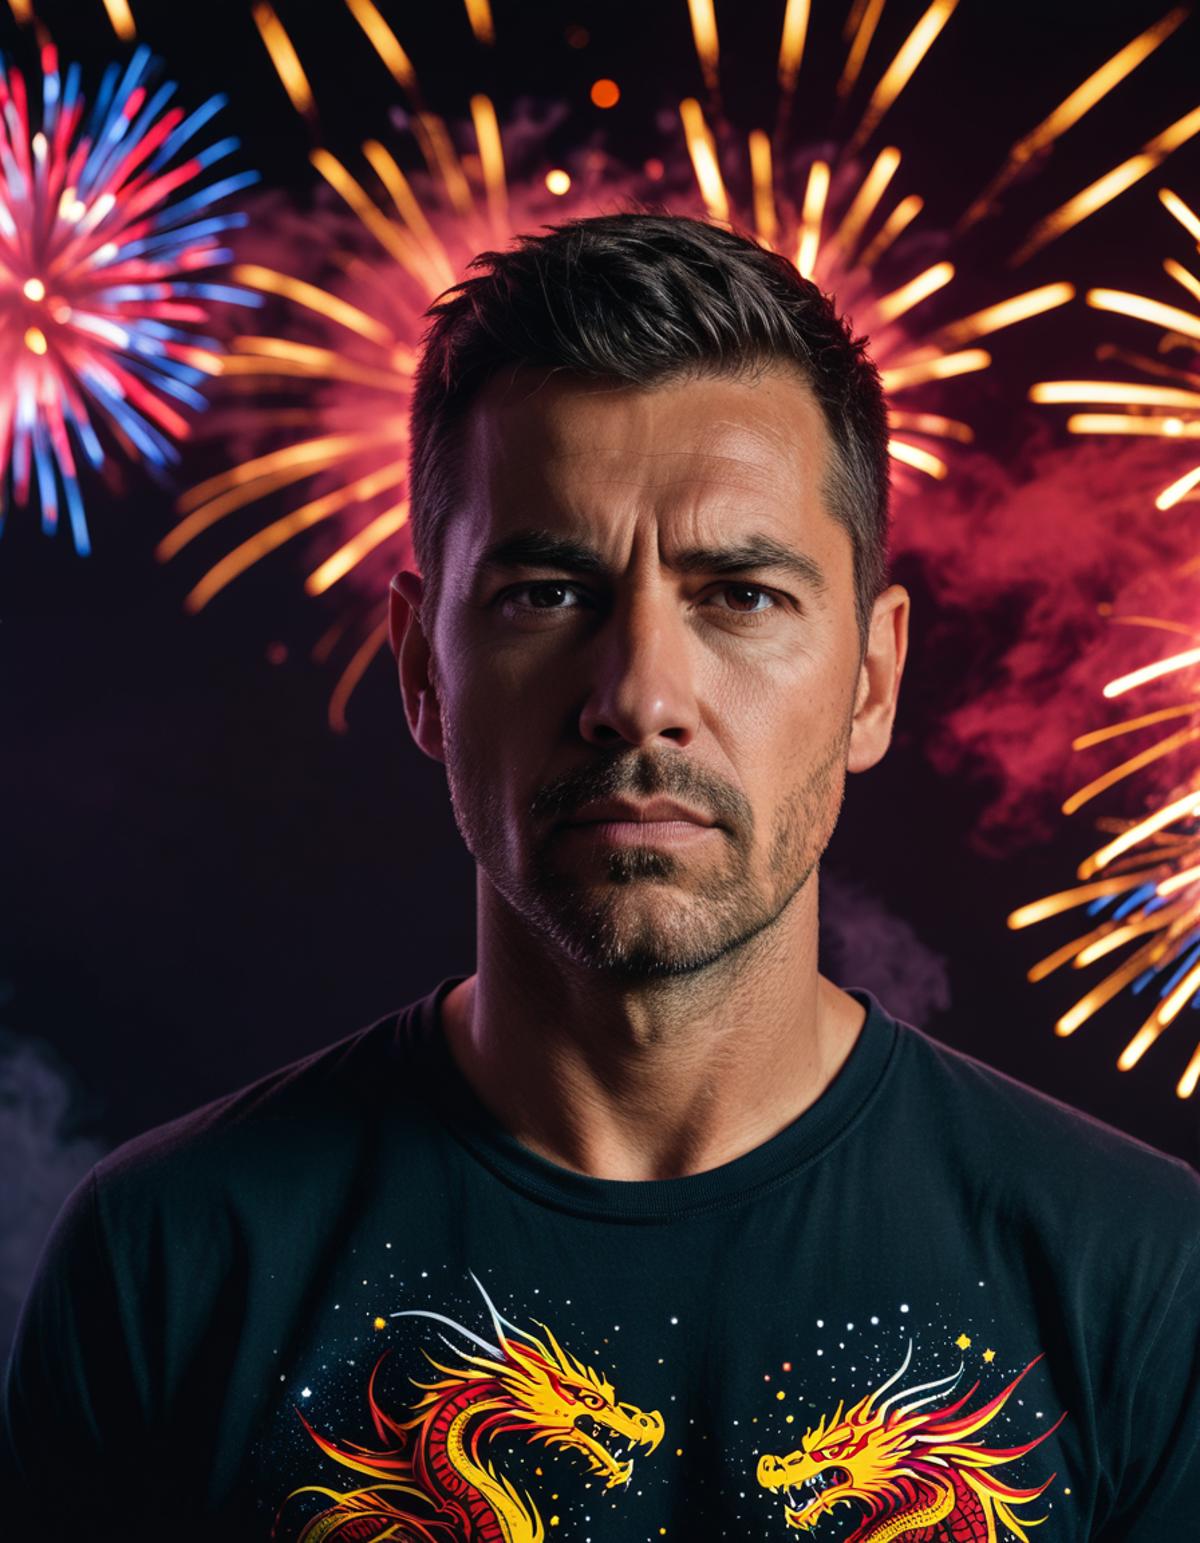 A man with a black shirt and beard staring into the camera with fireworks in the background.